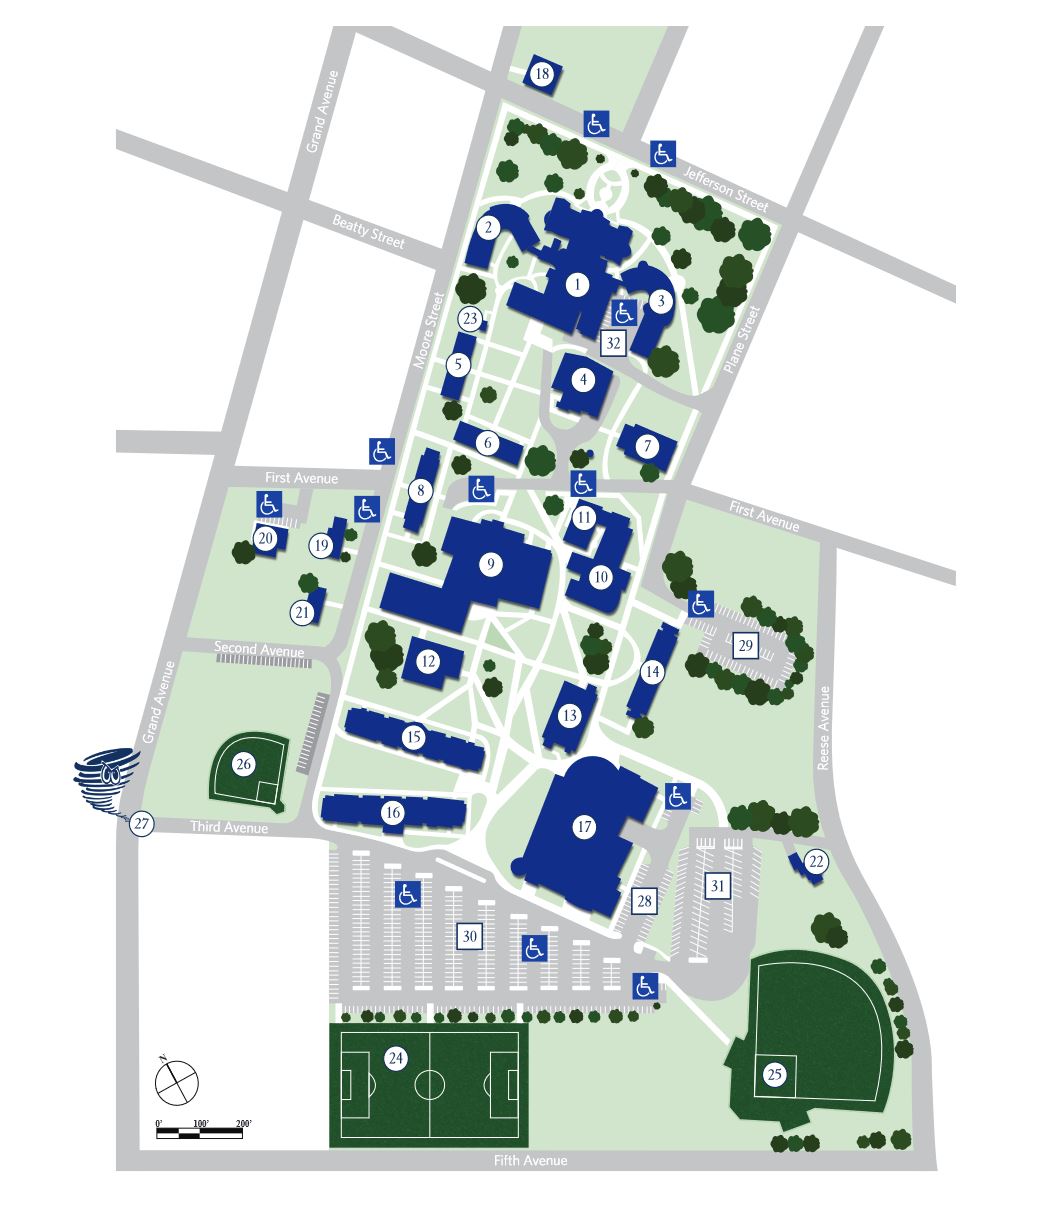 Centenary Campus Map